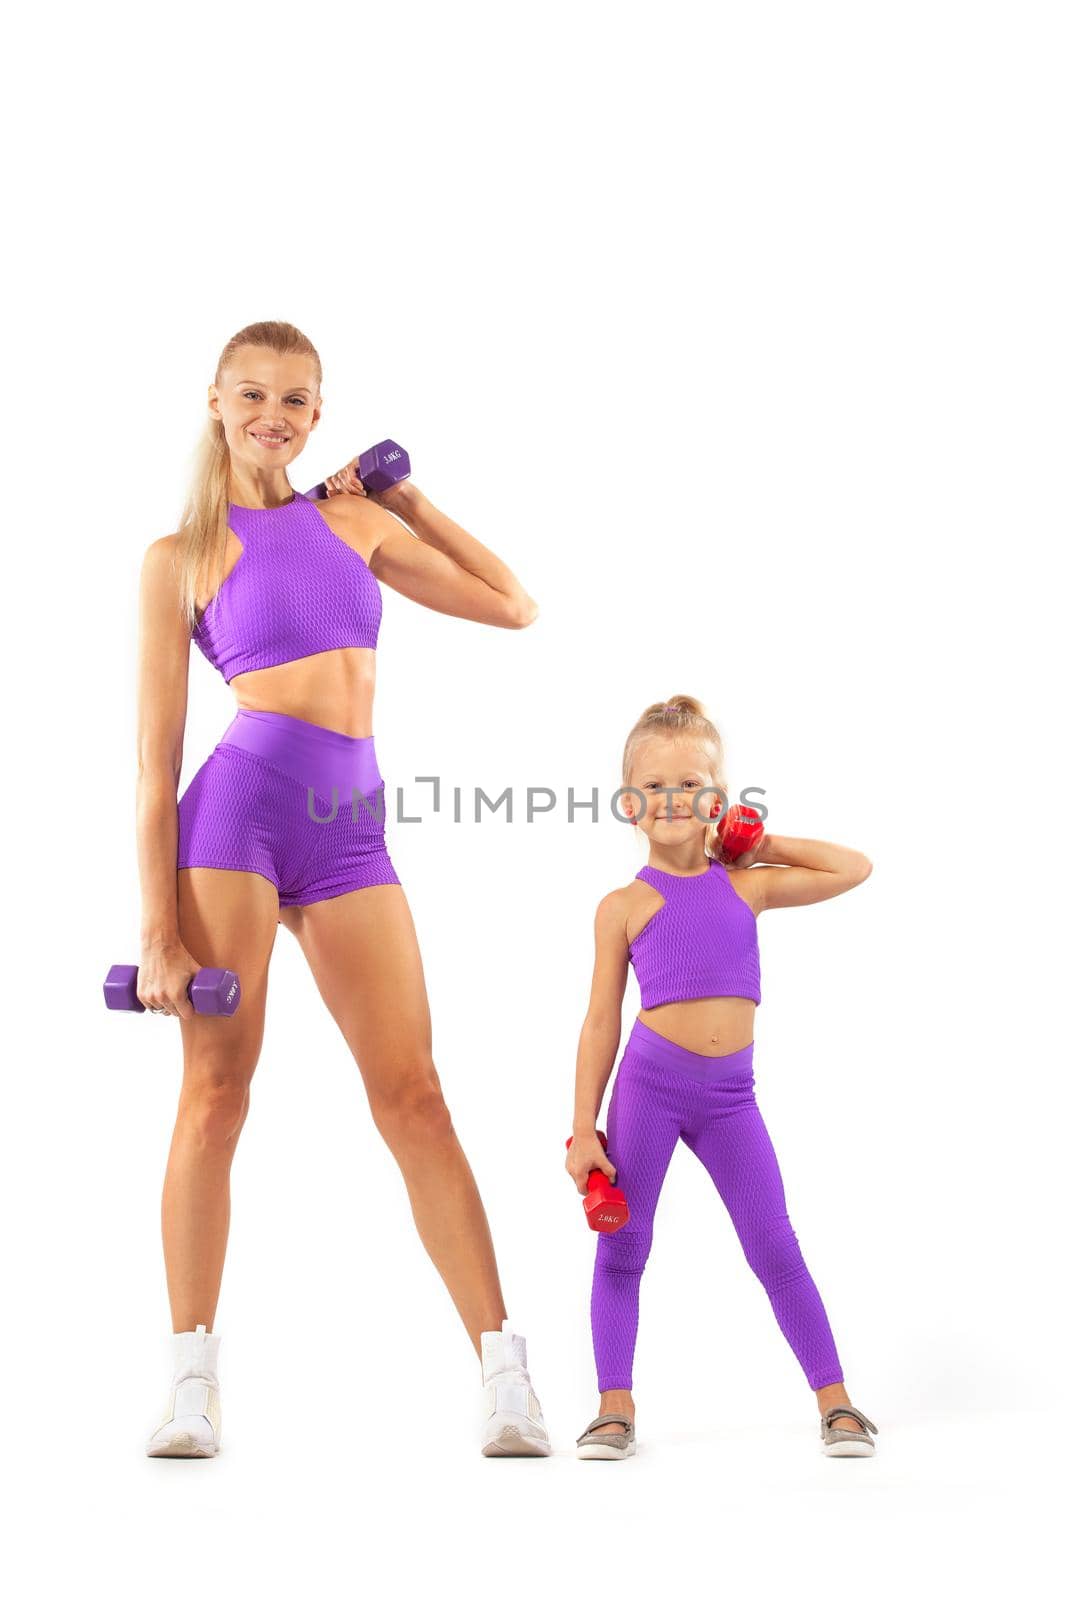 Kid doing fitness exercises at home in her room